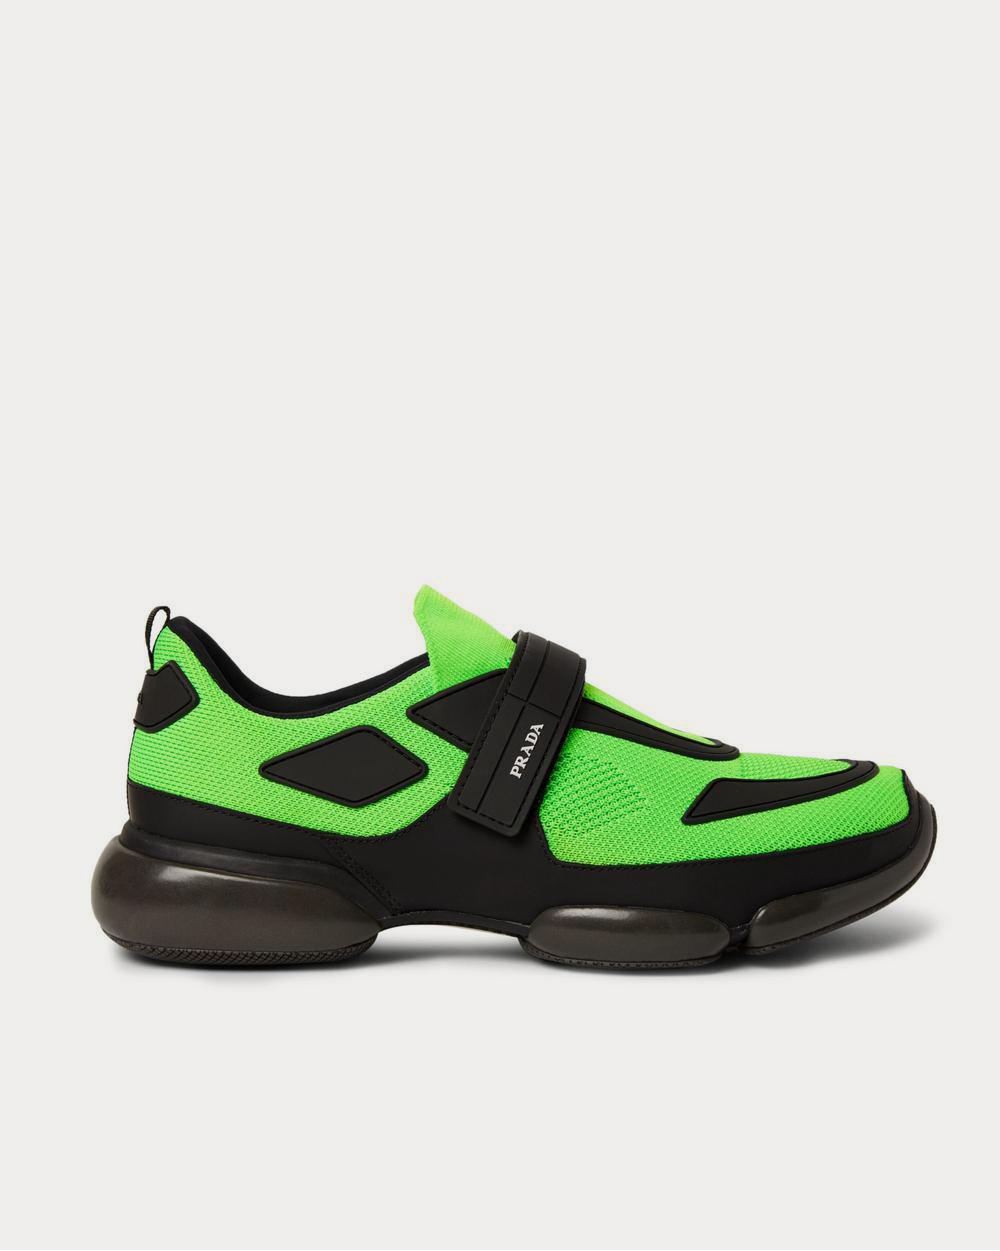 Prada Cloudbust Mesh, Rubber and Leather Lime green low top sneakers -  Sneak in Peace